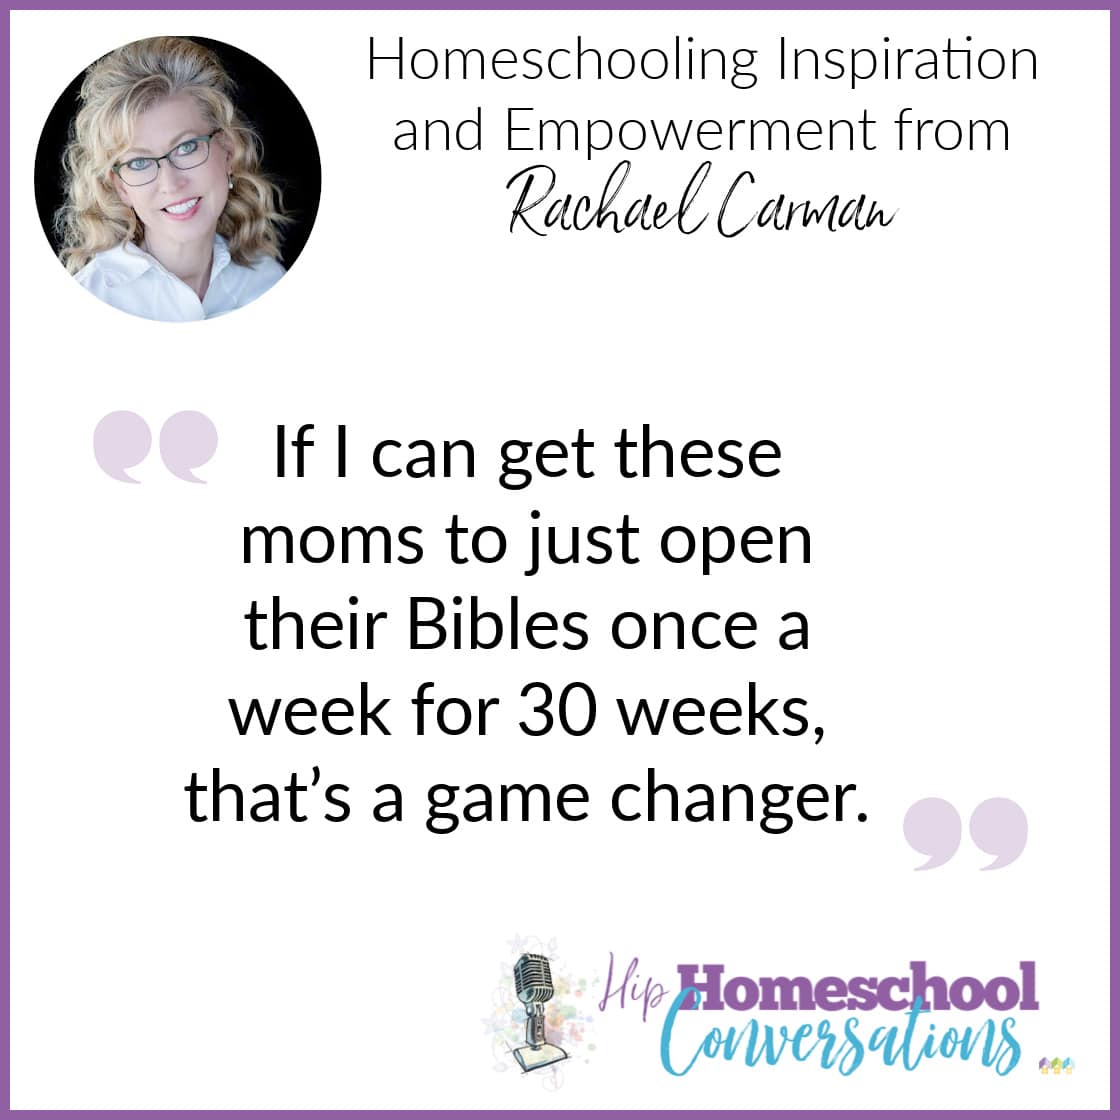 If you have ever felt inadequate to homeschool or just uninterested, join Trish as she interviews Rachael Carman. They discuss everything from butterflies to the Bible in a hilariously funny, truly sincere, and positively encouraging podcast to give Homeschooling Inspiration and Empowerment.